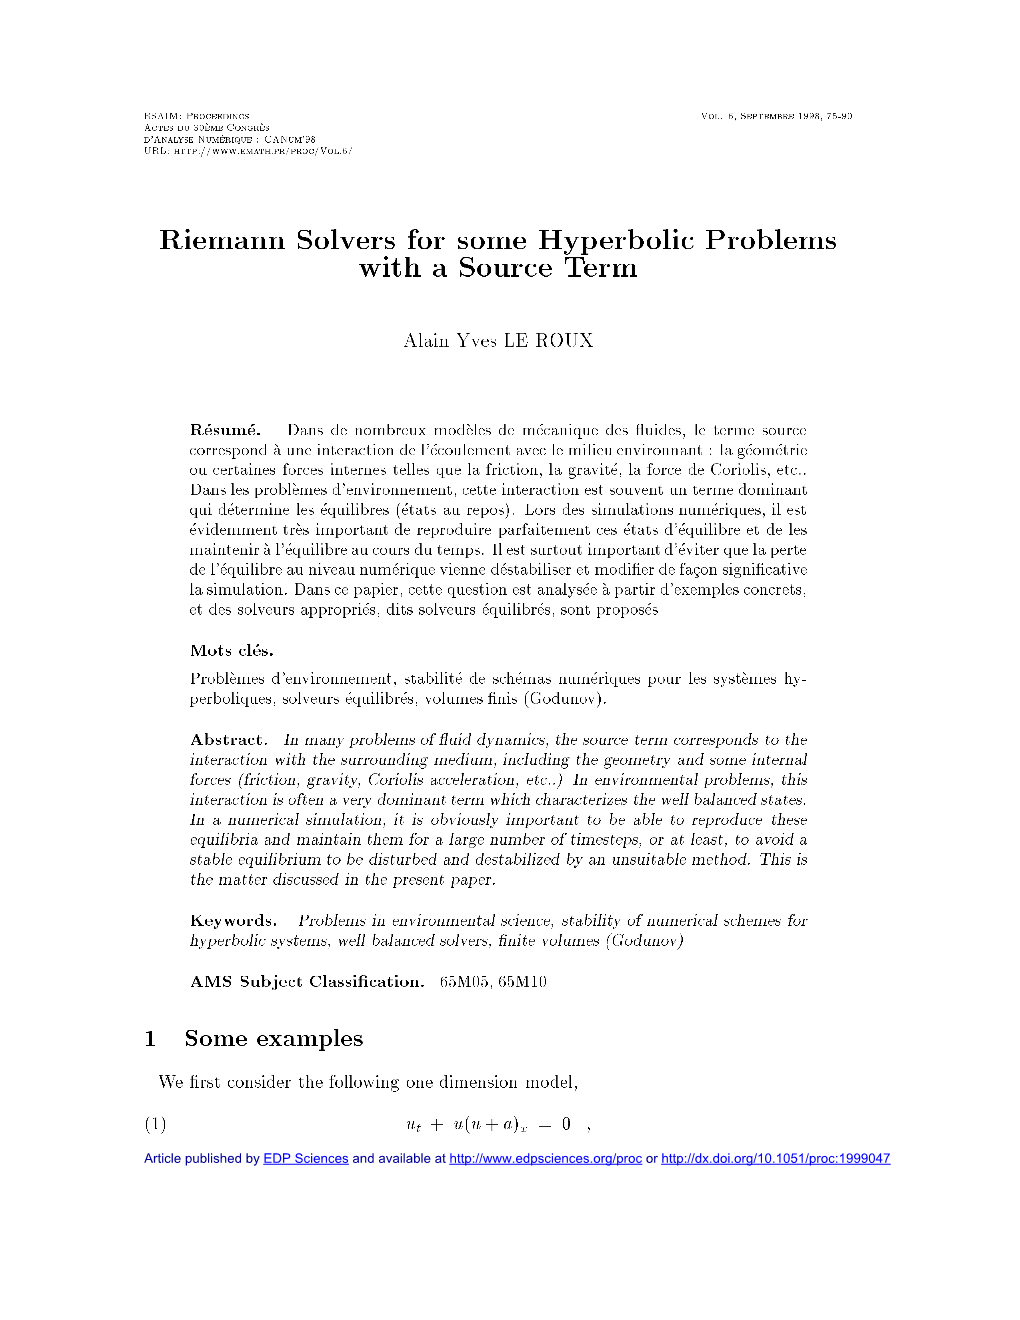 Riemann Solvers for Some Hyperbolic Problems with a Source Term